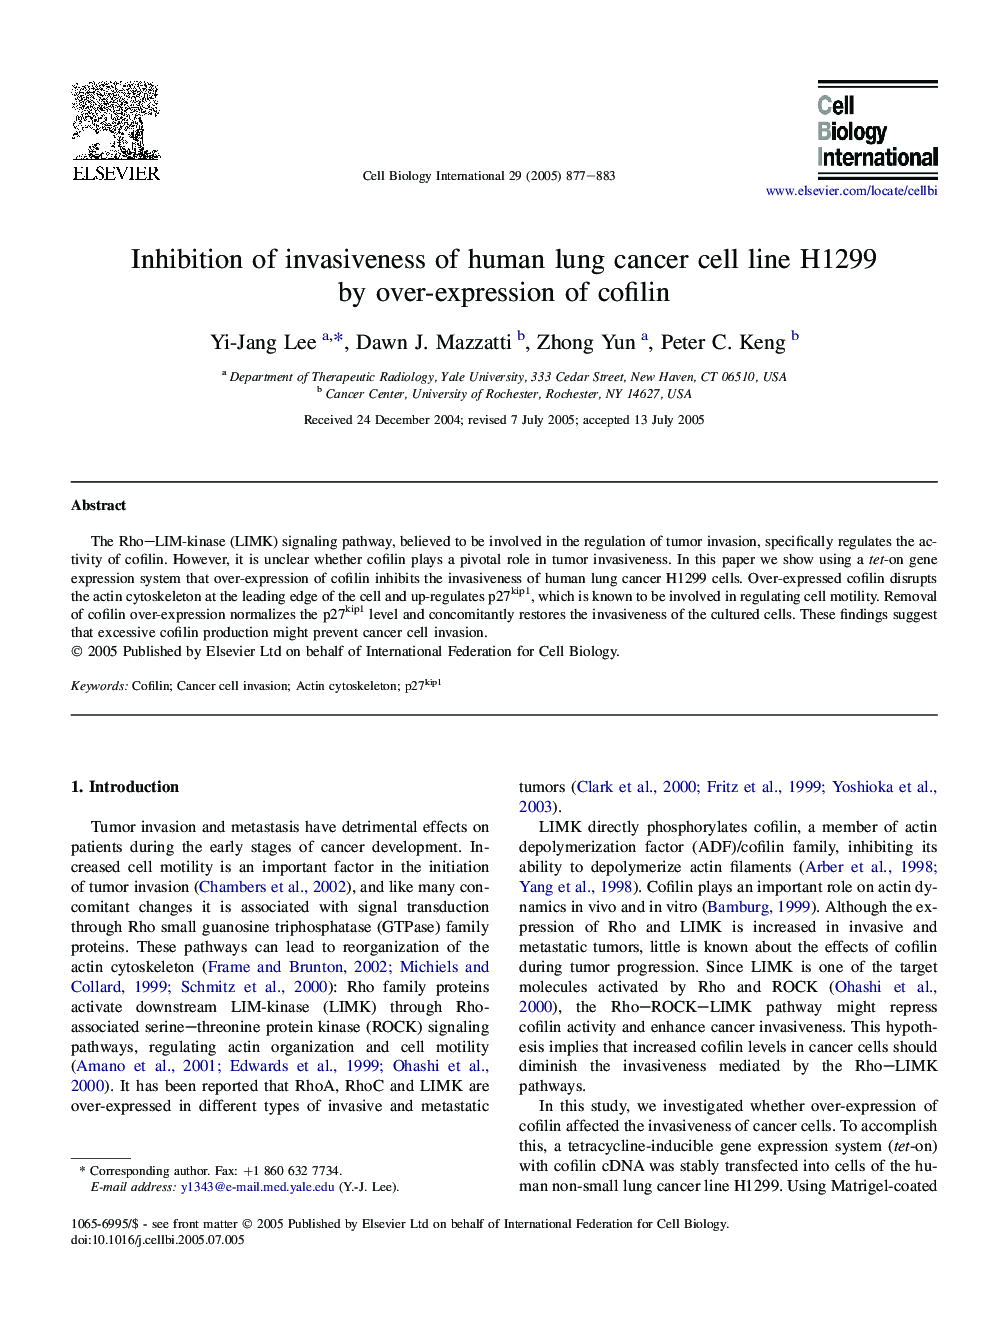 Inhibition of invasiveness of human lung cancer cell line H1299 by over-expression of cofilin